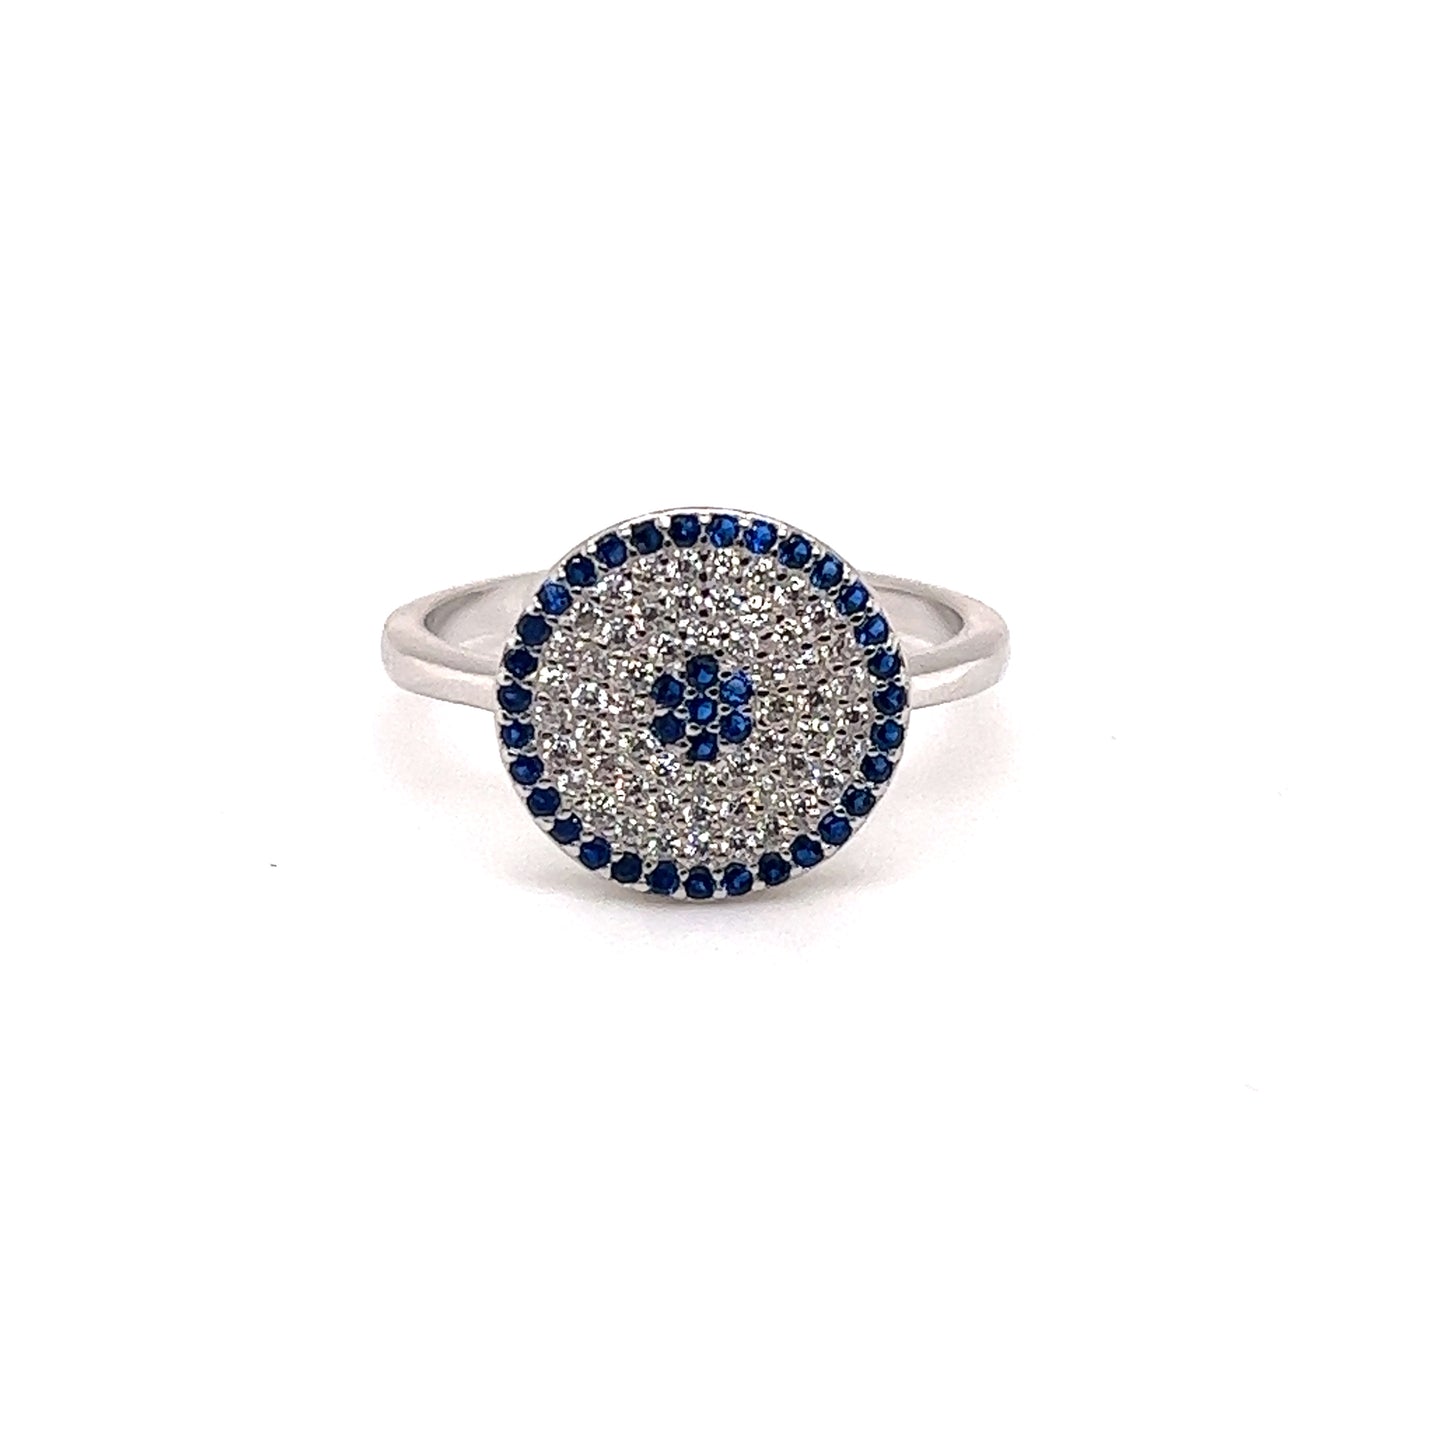 An elegant Cubic Zirconia Evil Eye Ring with blue and white cubic zirconia diamonds.